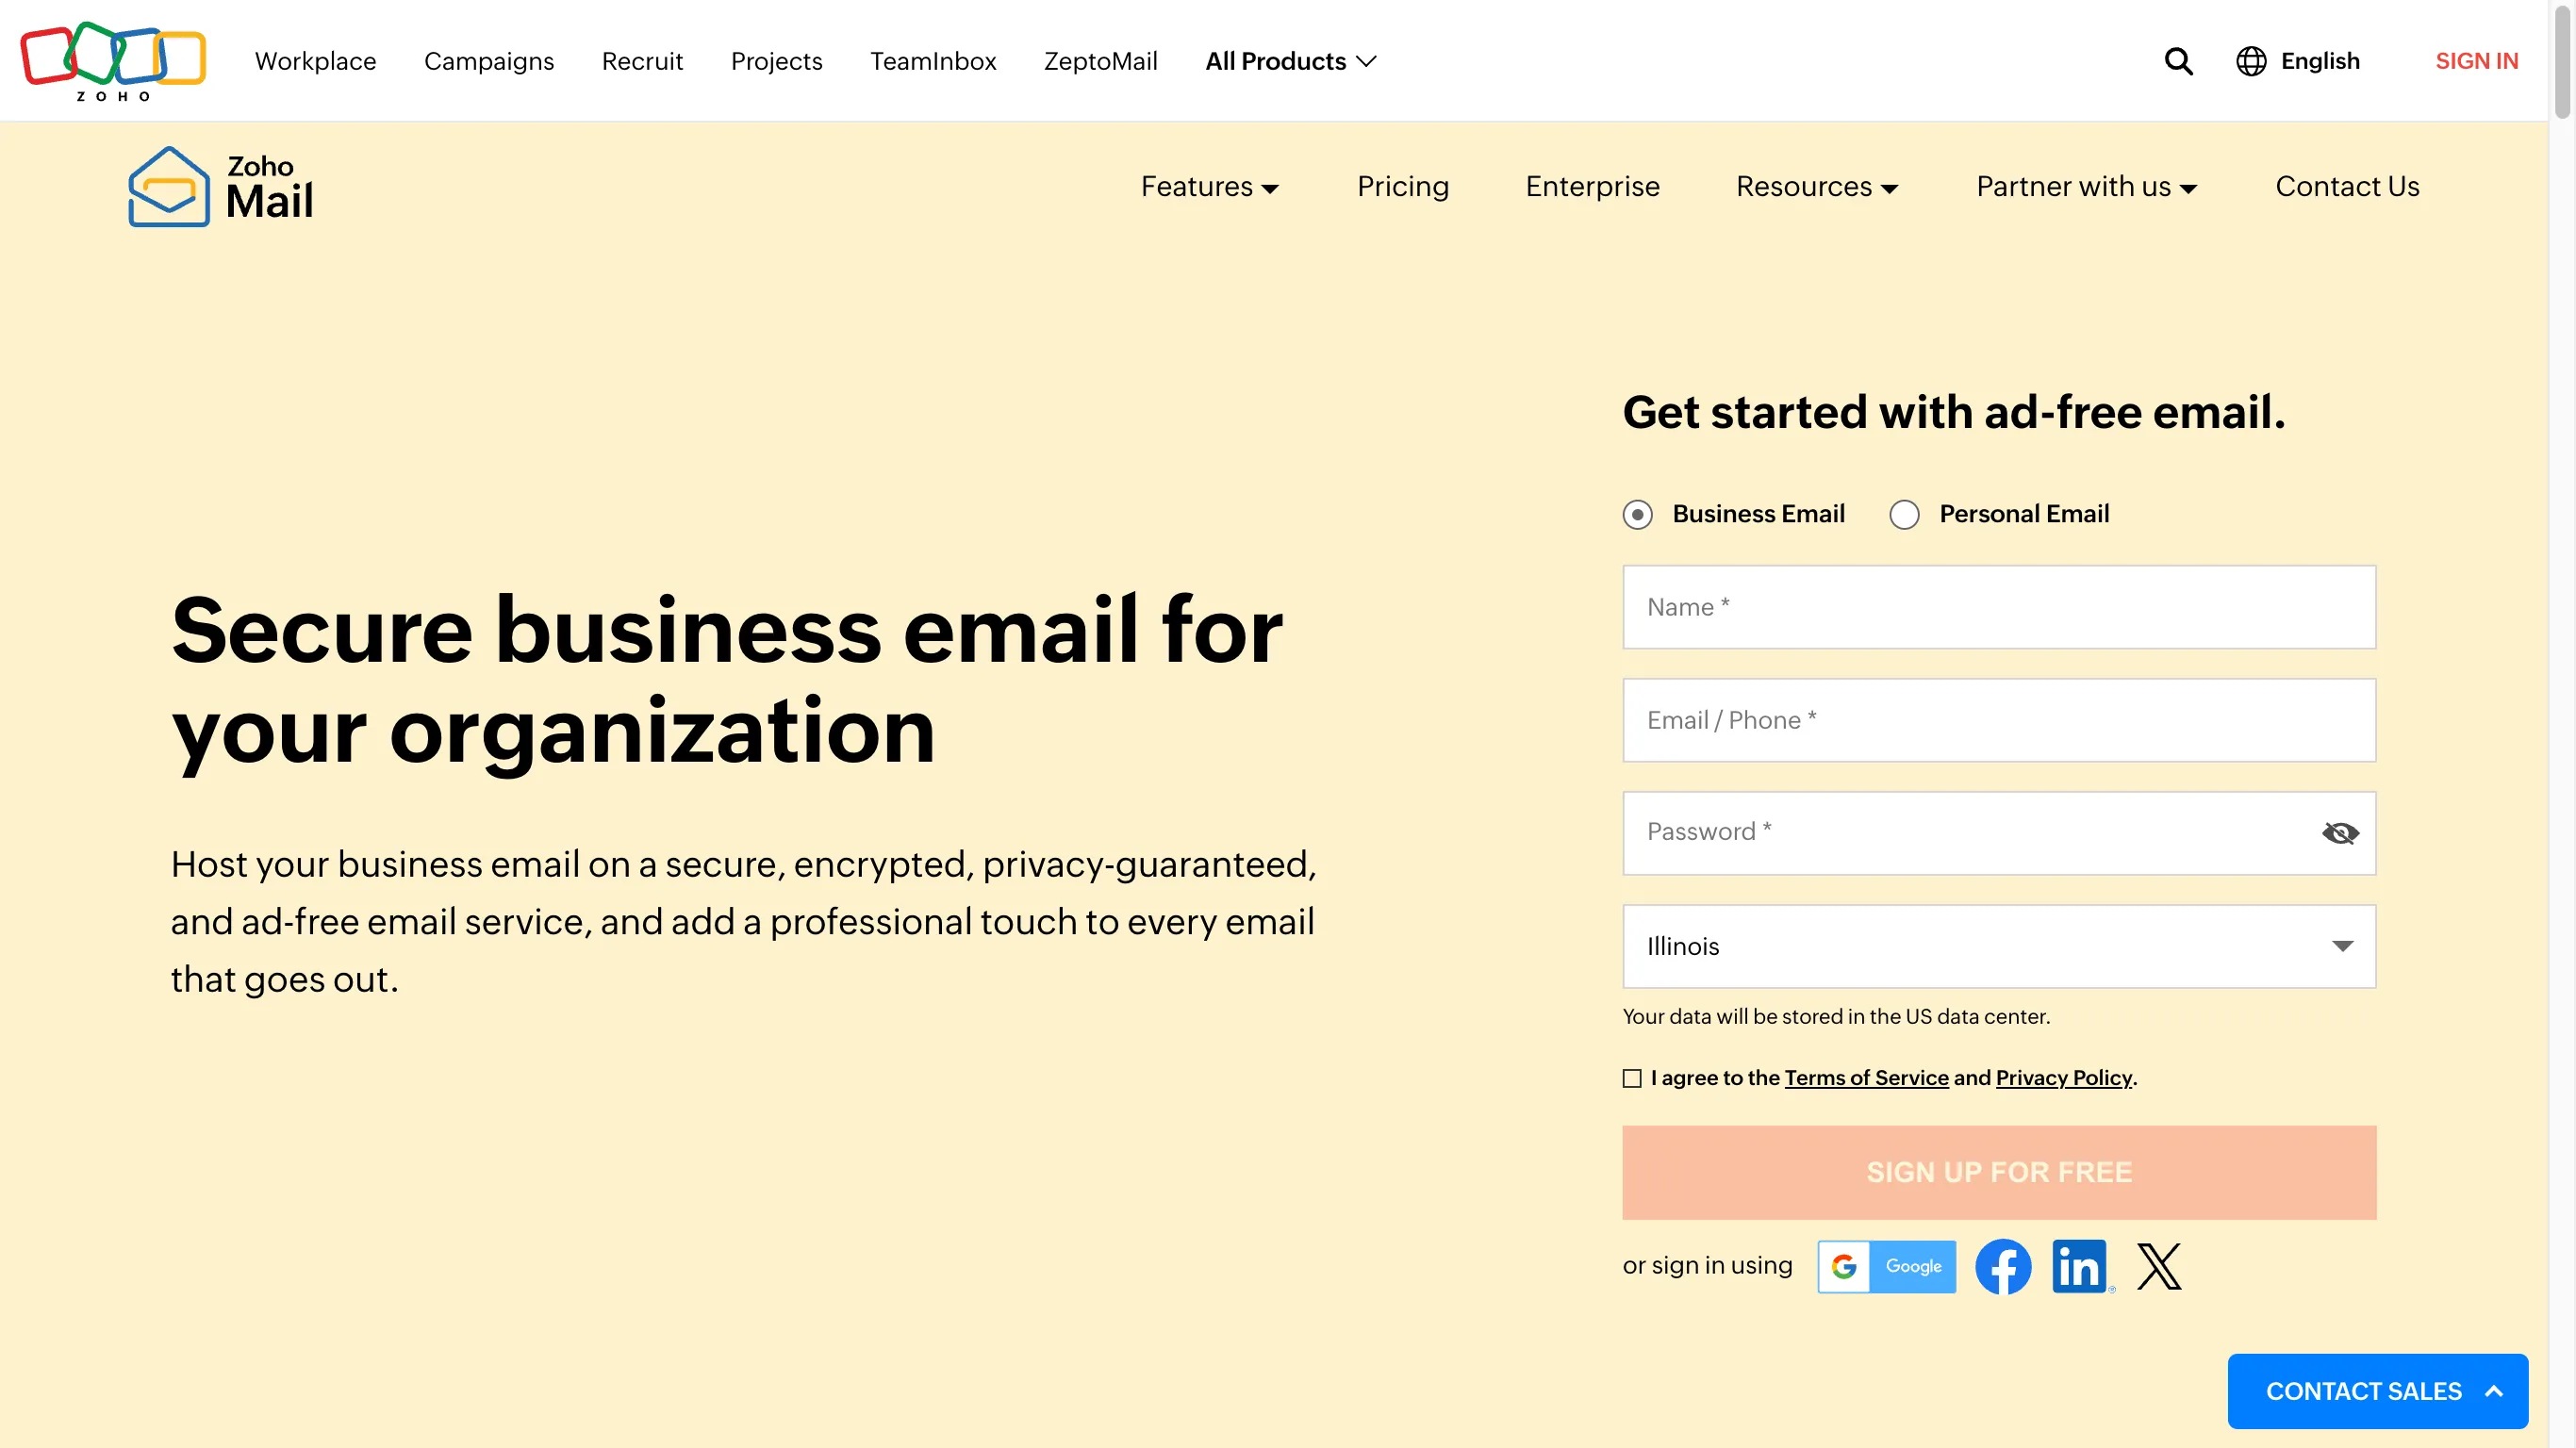 Zoho is a closed-source email service.